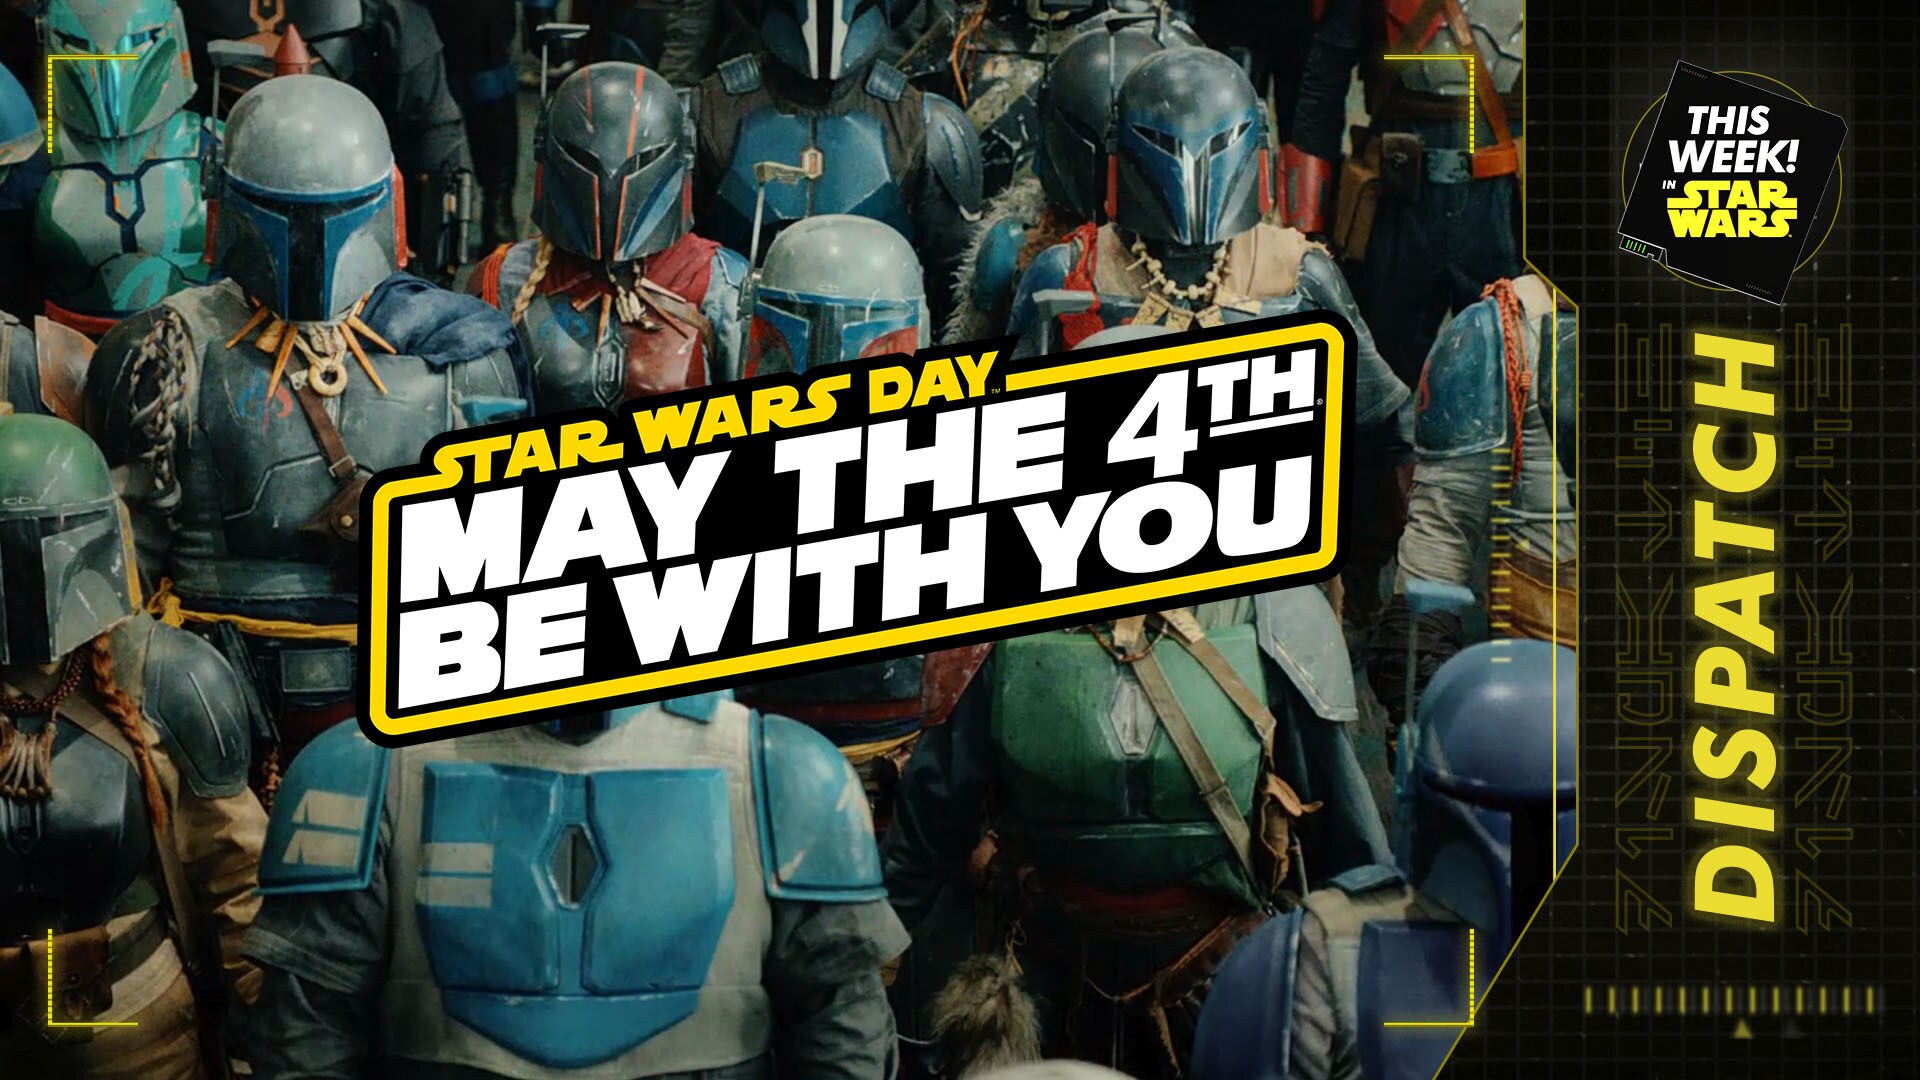 Now THIS is a Star Wars Day Roundup! | This Week! in Star Wars Dispatch